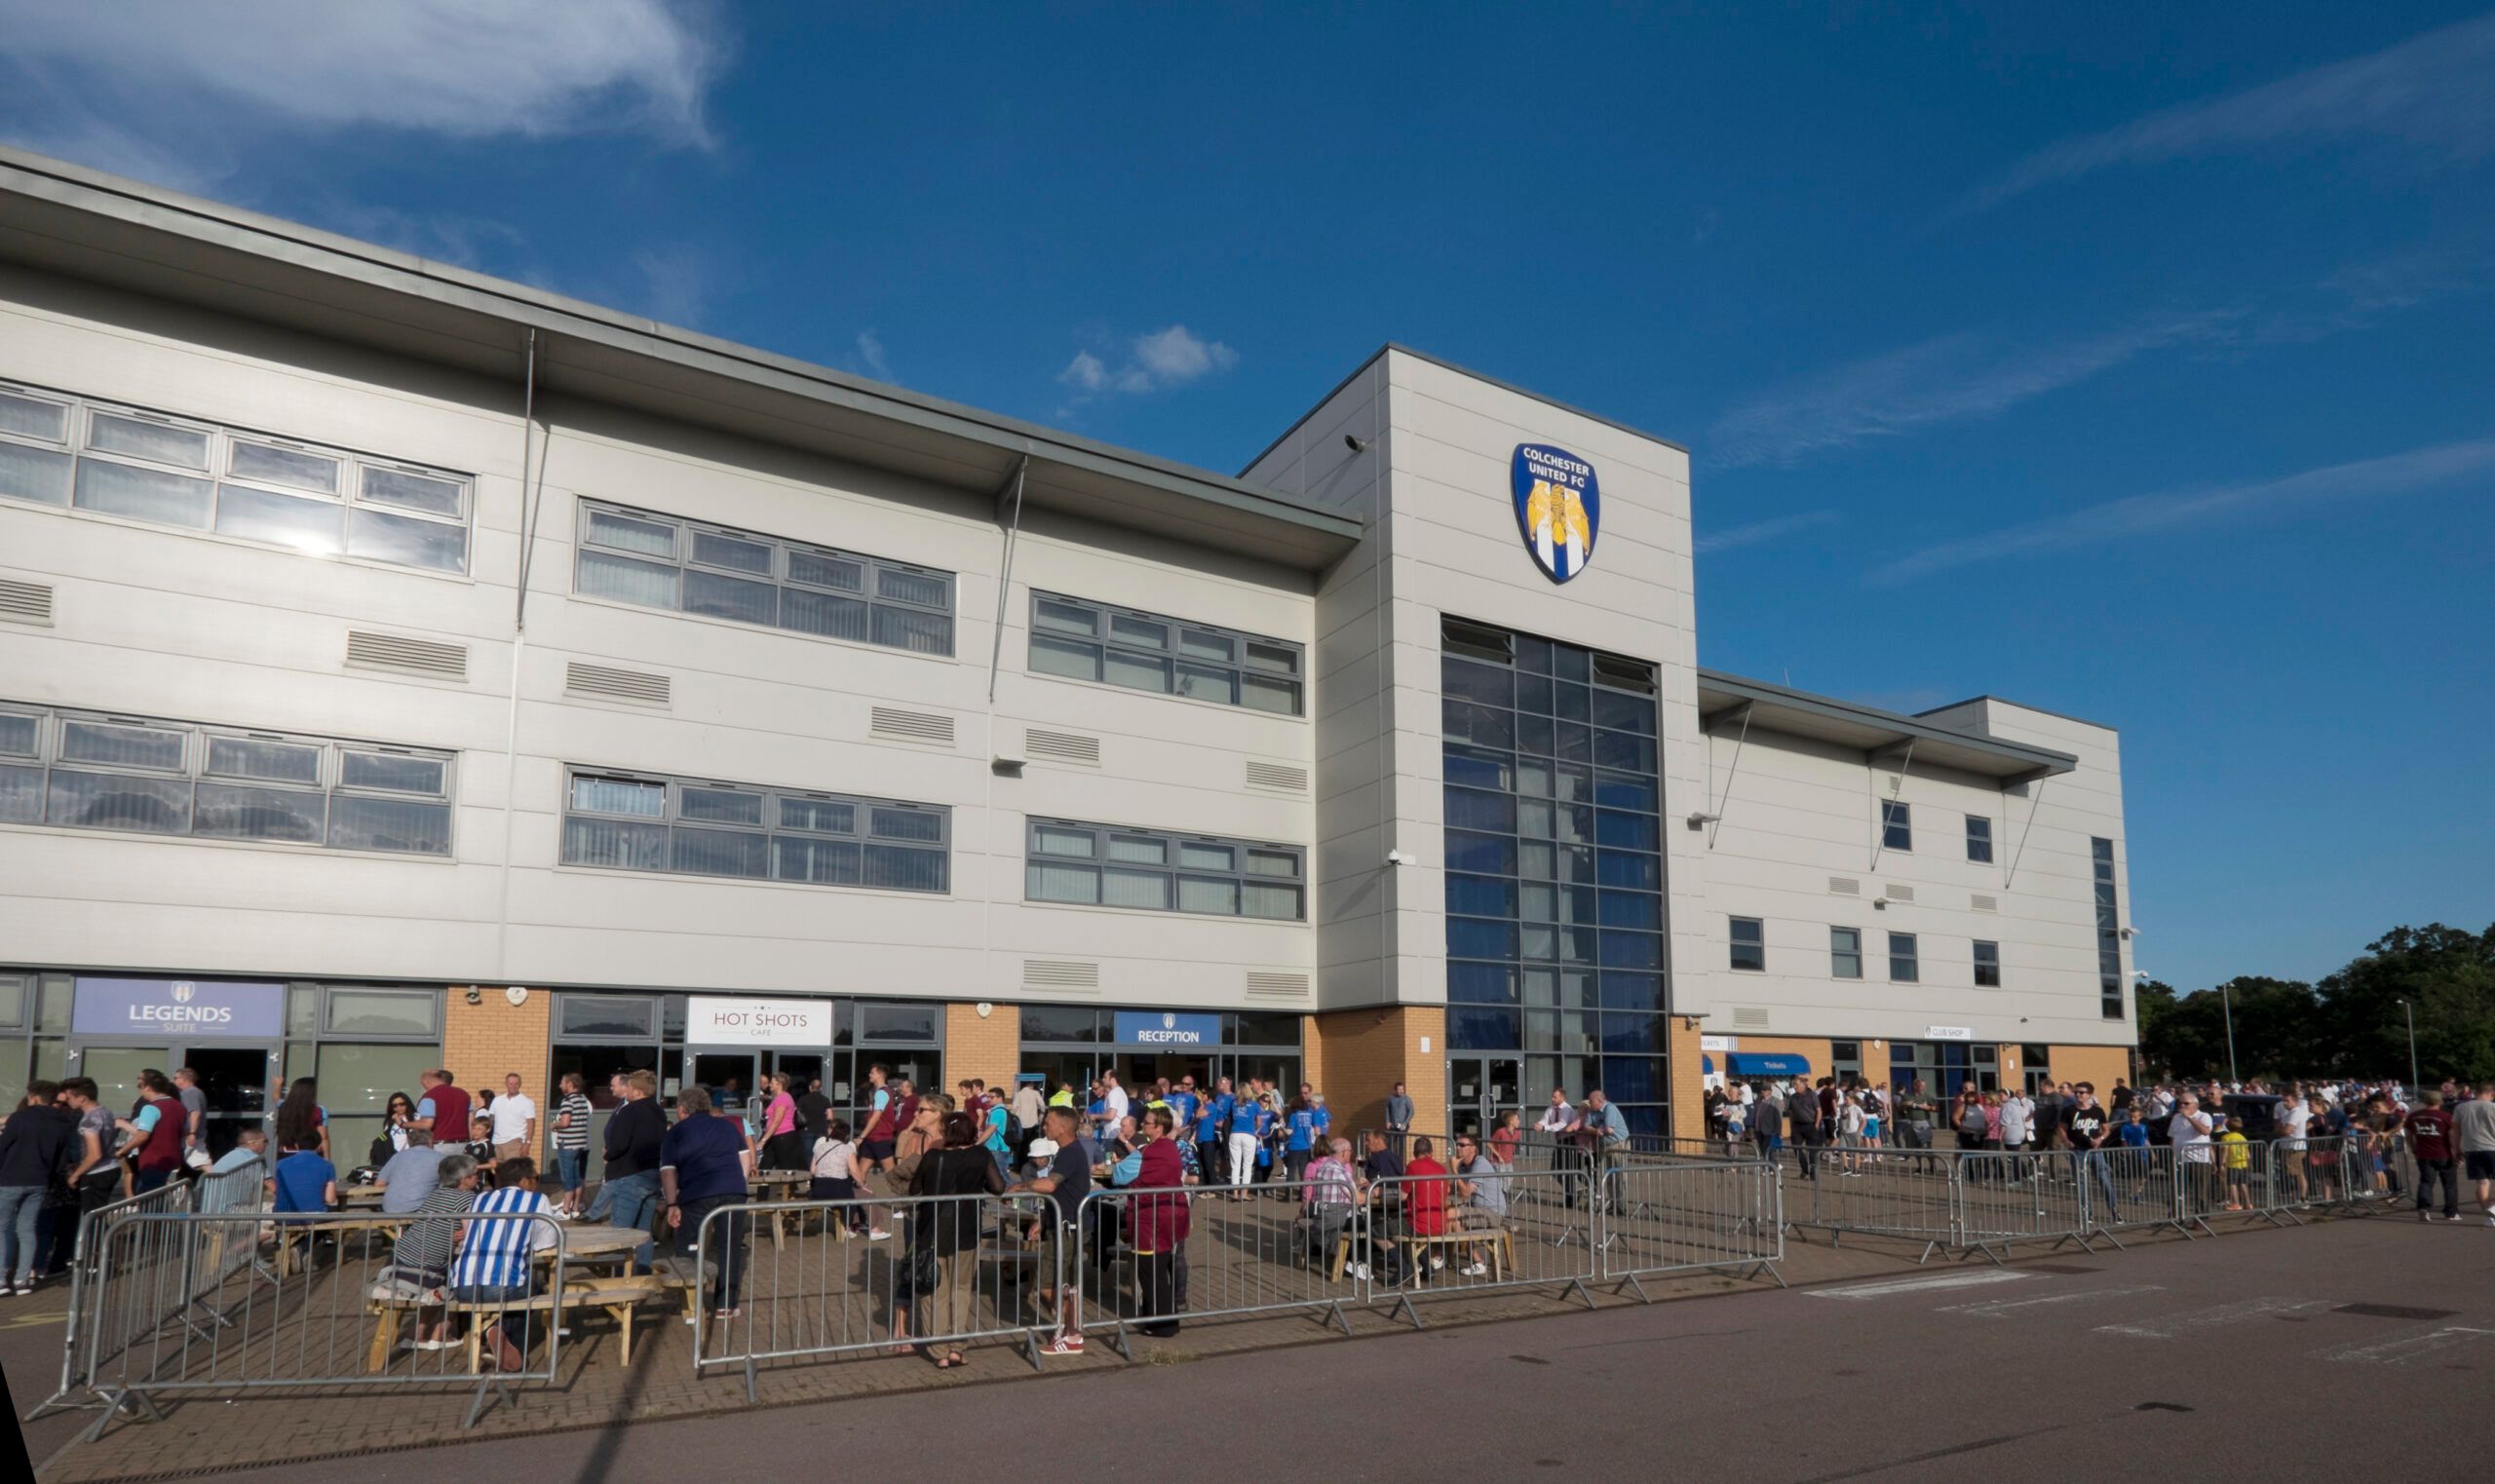 Football - Colchester United v West Ham United - Pre Season Friendly - Weston Homes Community Stadium - 15/16 - 21/7/15 
General view outside the stadium before the game 
Mandatory Credit: Action Images / Alan Walter 
EDITORIAL USE ONLY.